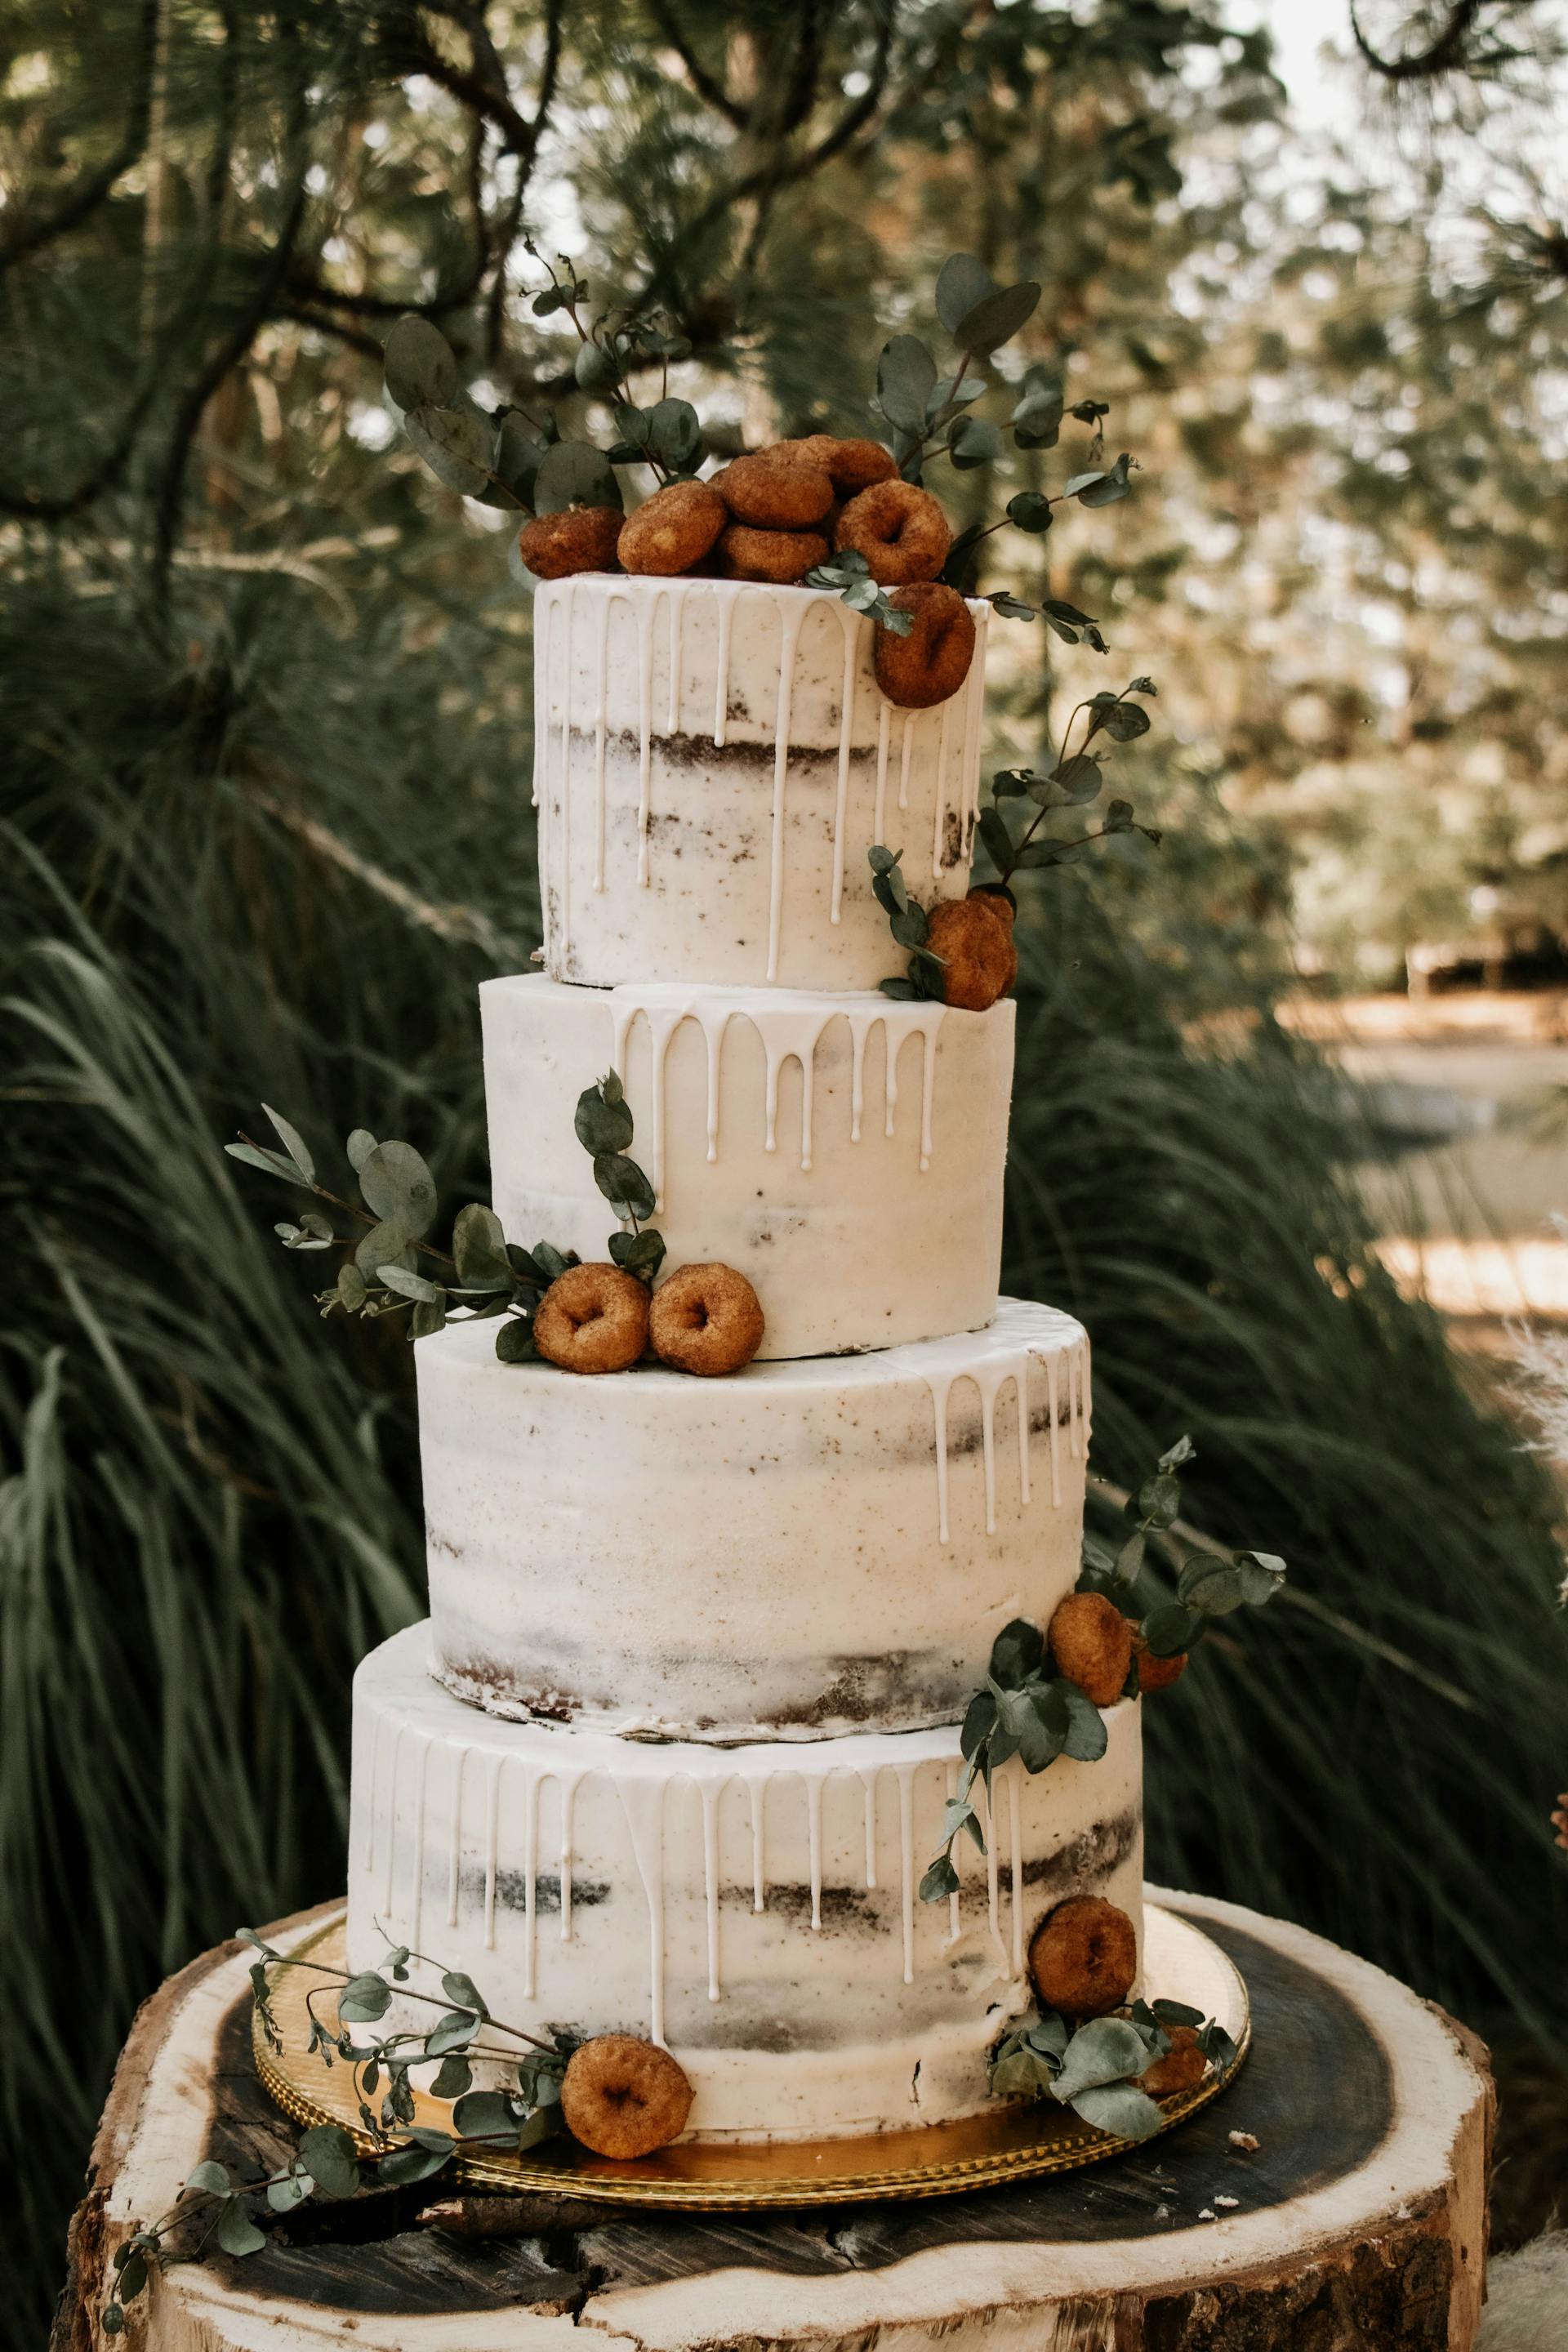 A four-tiered cake | Source: Pexels